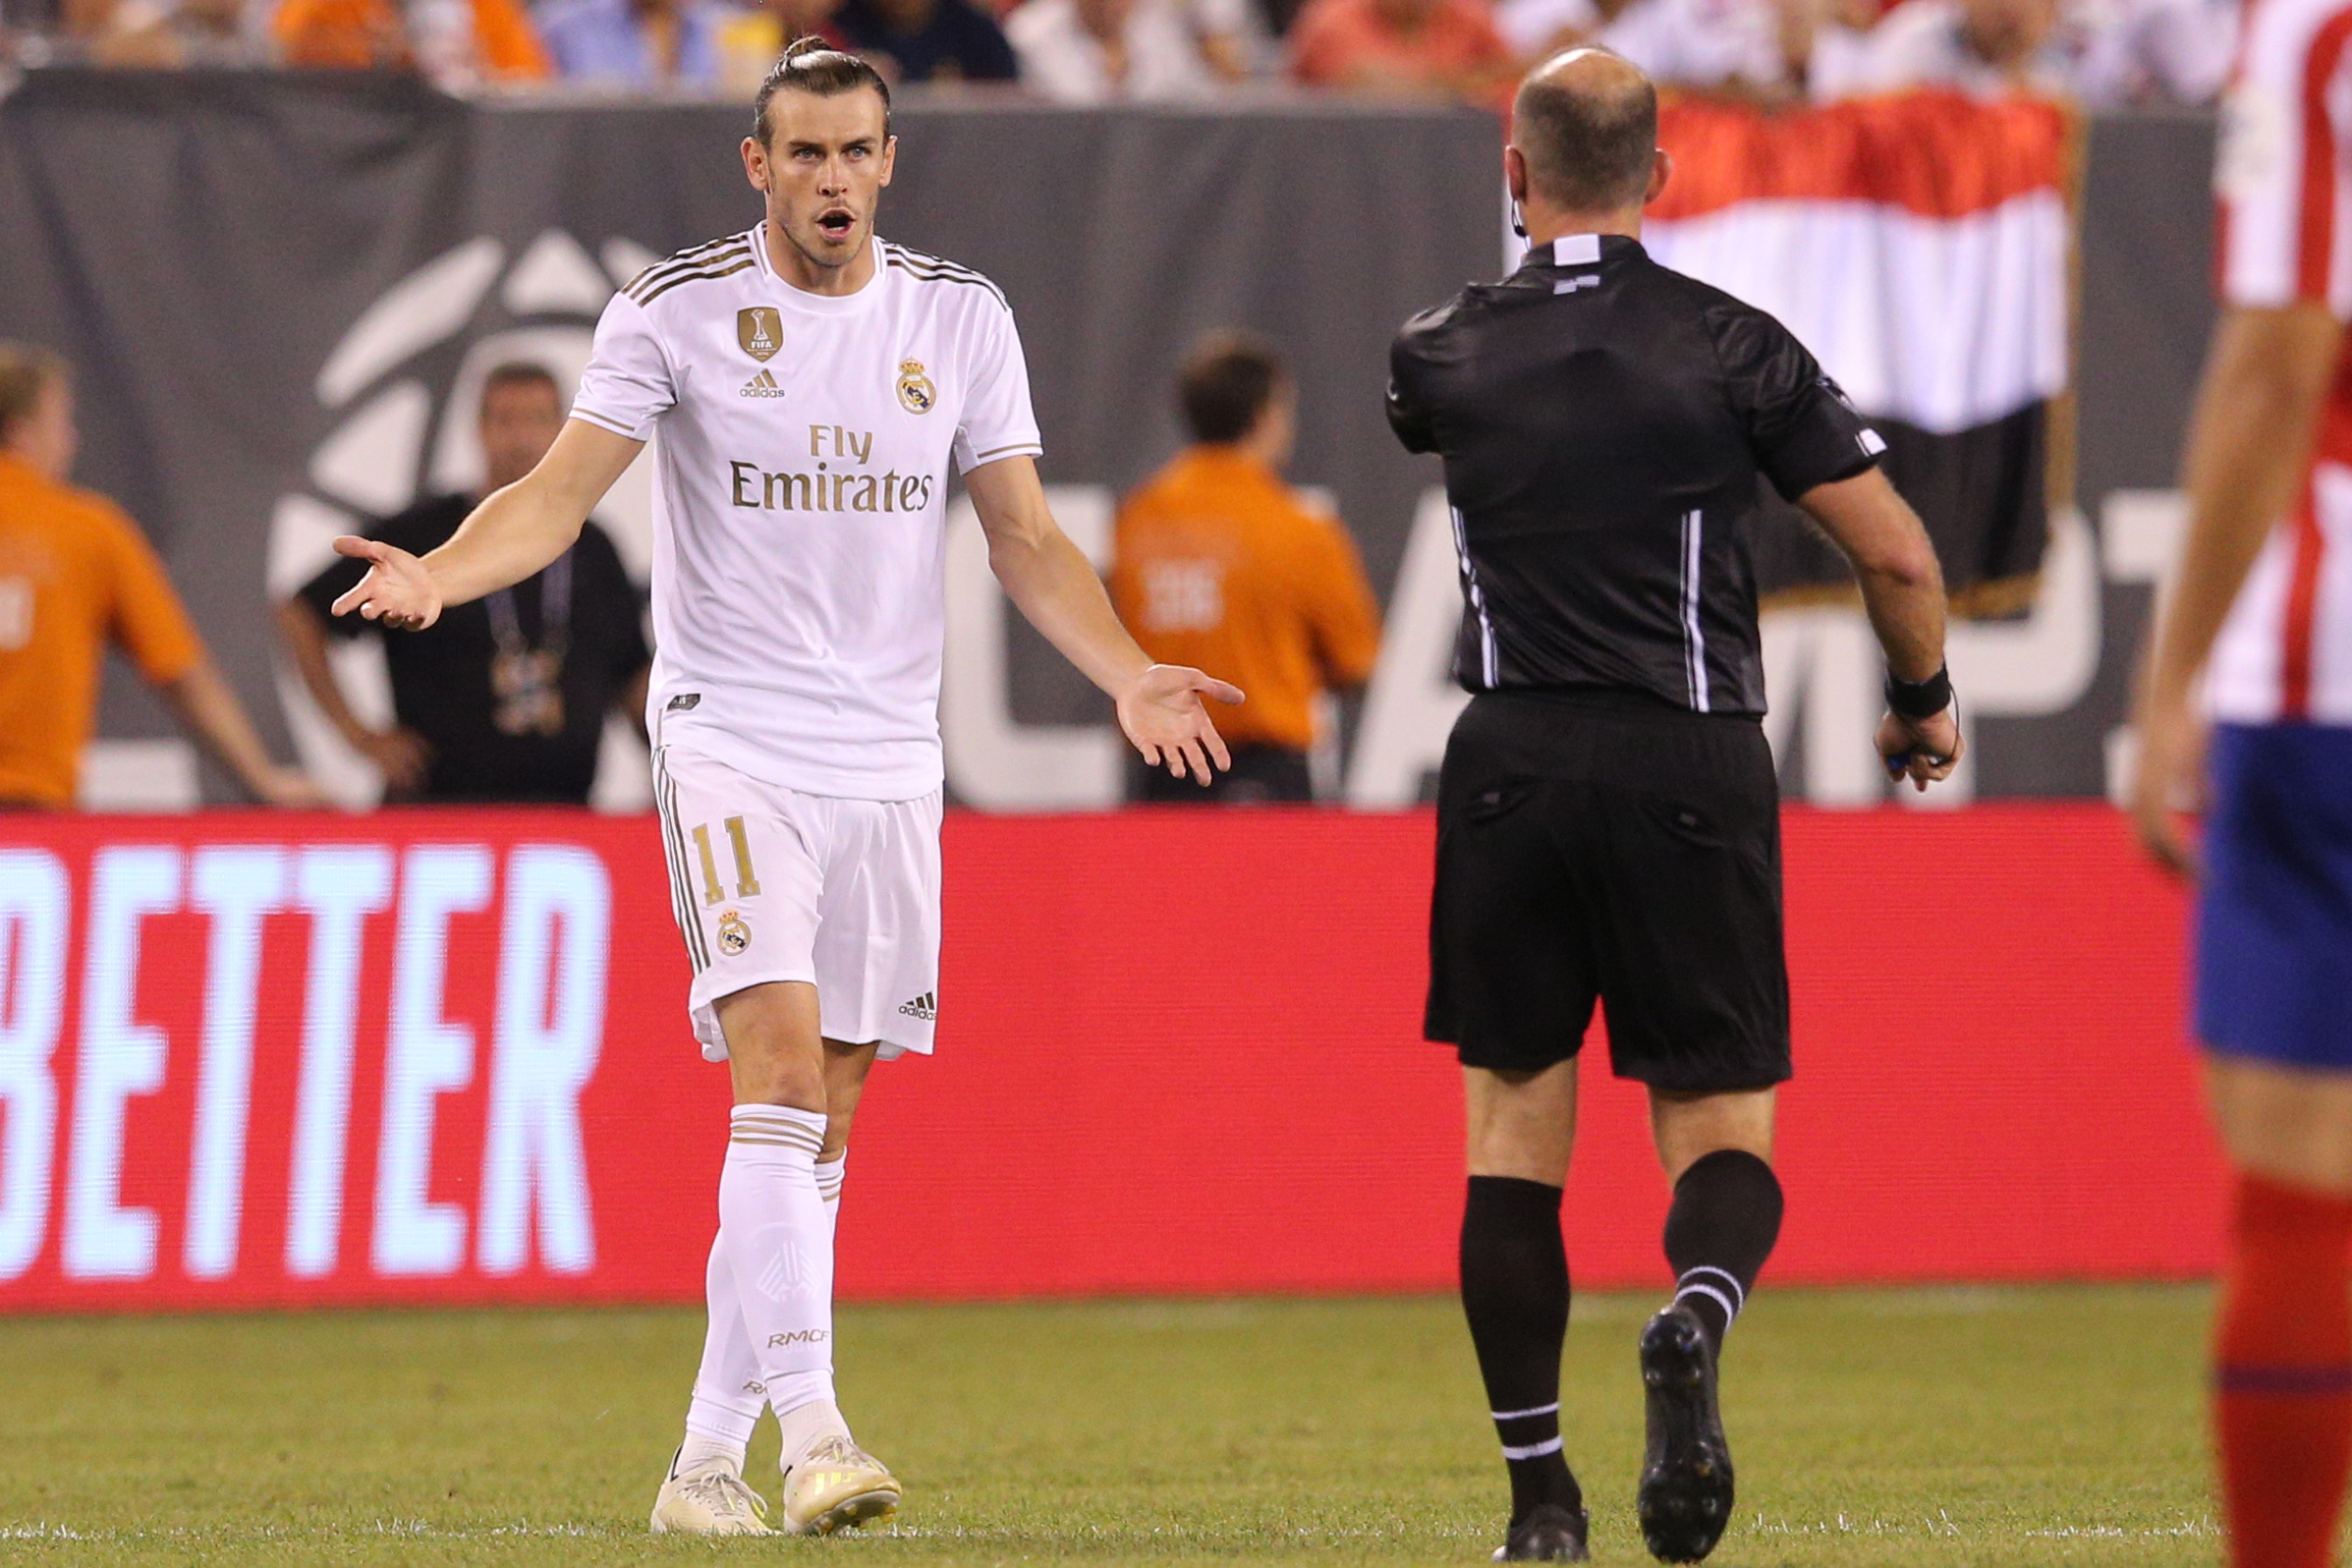 Soccer: International Champions Cup-Real Madrid at Atletico de Madrid